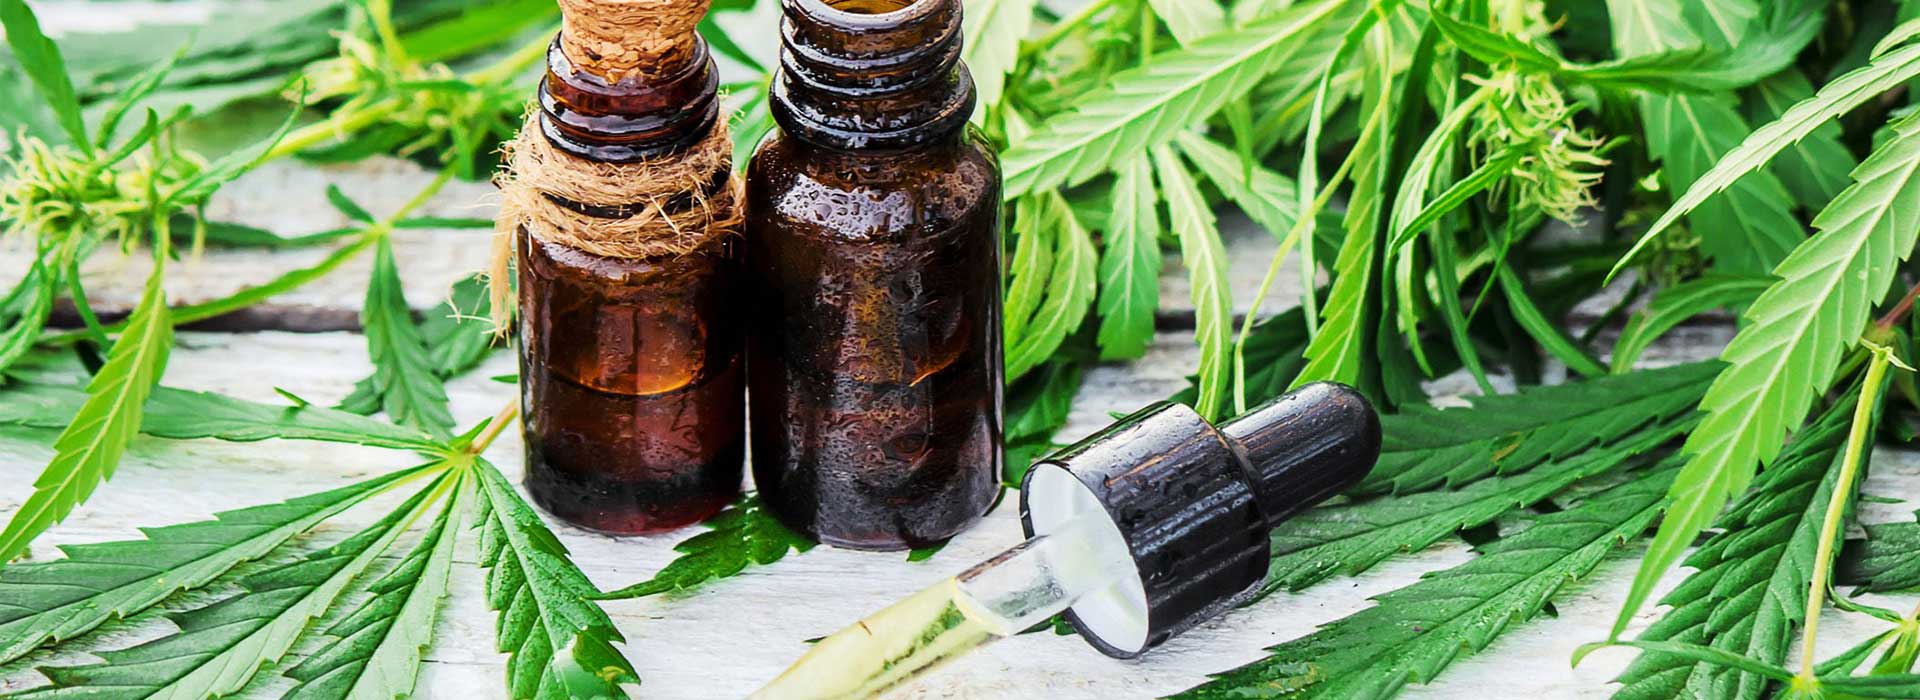 CBD Oil Bottles with Dropper and Cannabis Leaves